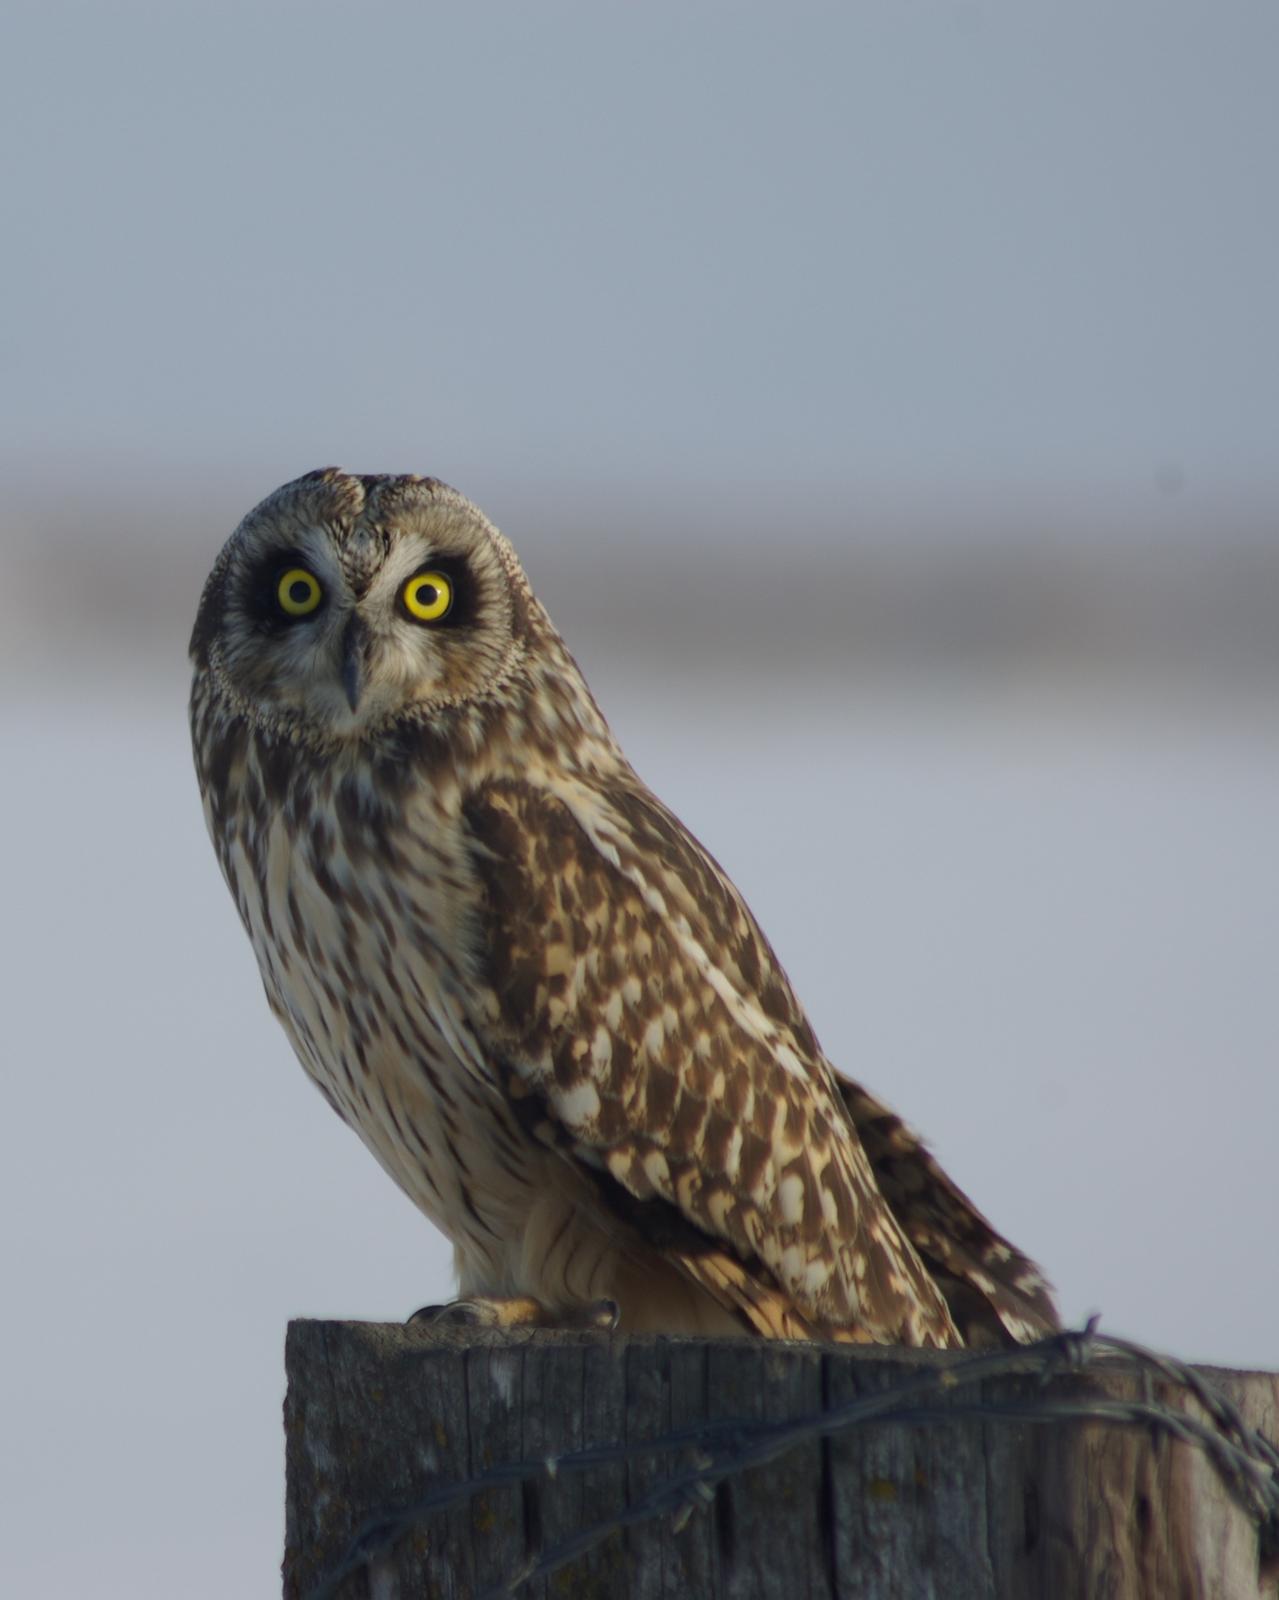 Short-eared Owl Photo by Leah R. Lewis